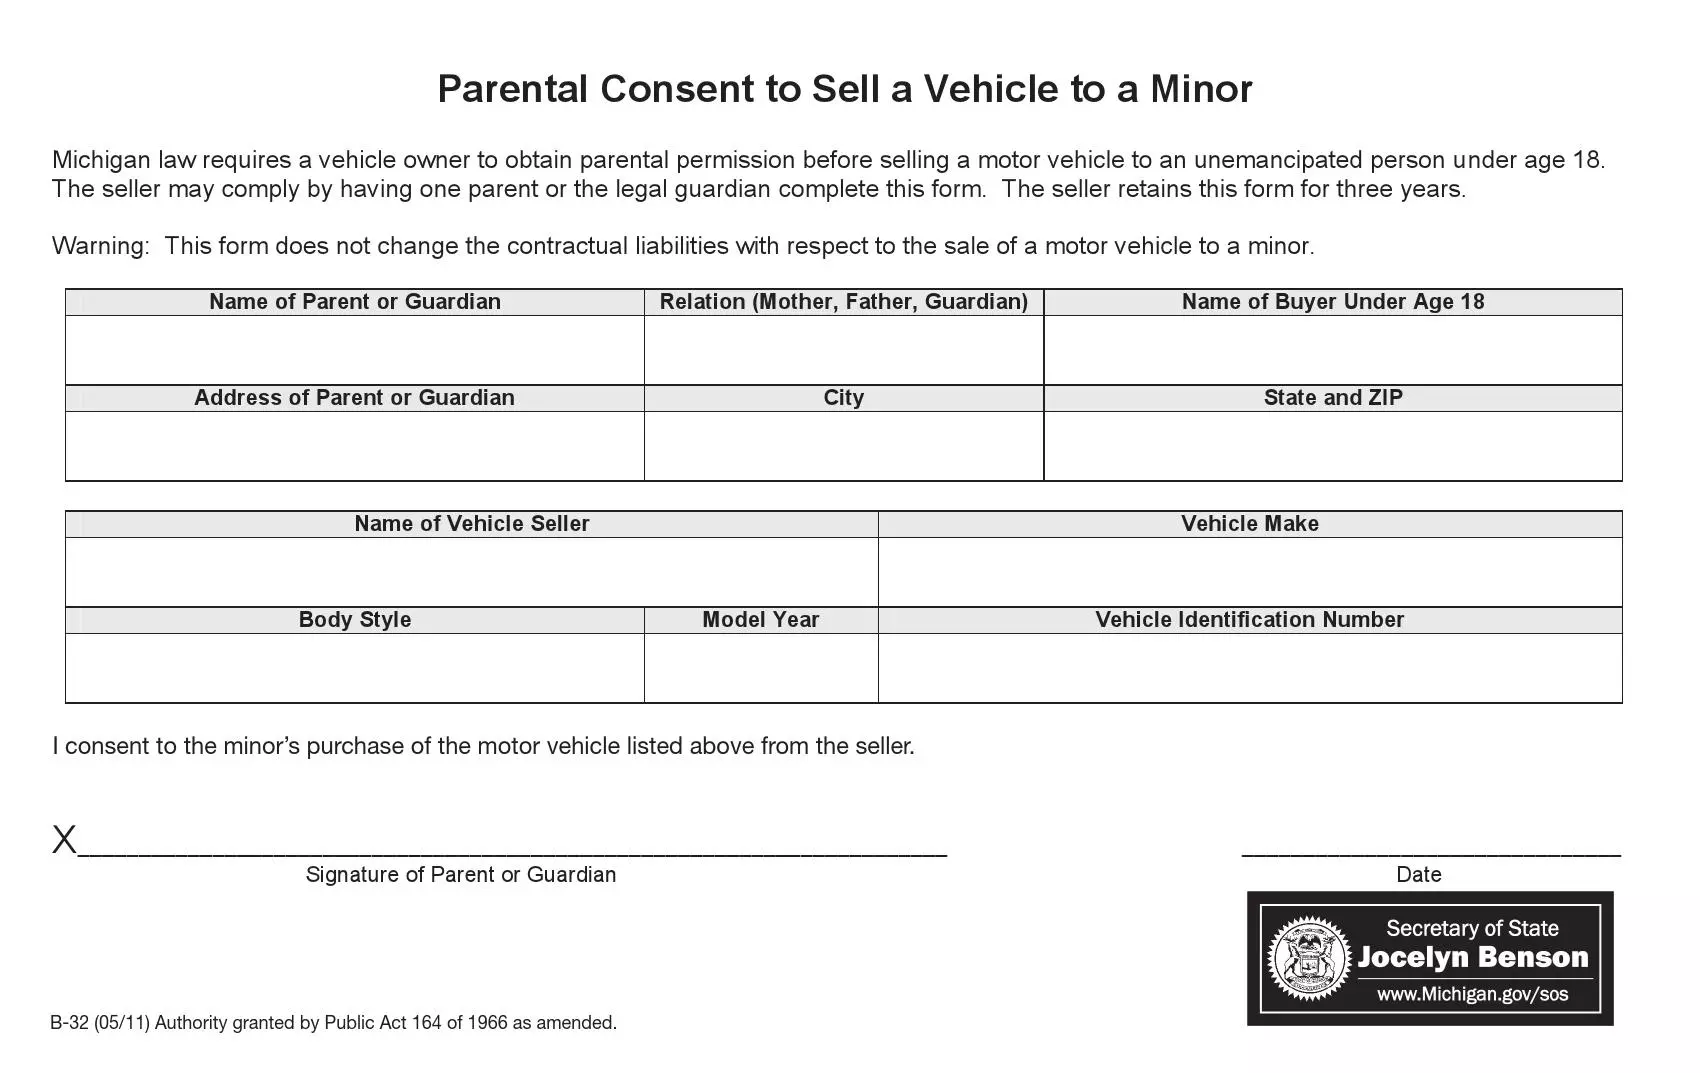 Parental Consent to Sell a Vehicle to a Minor (B-32)